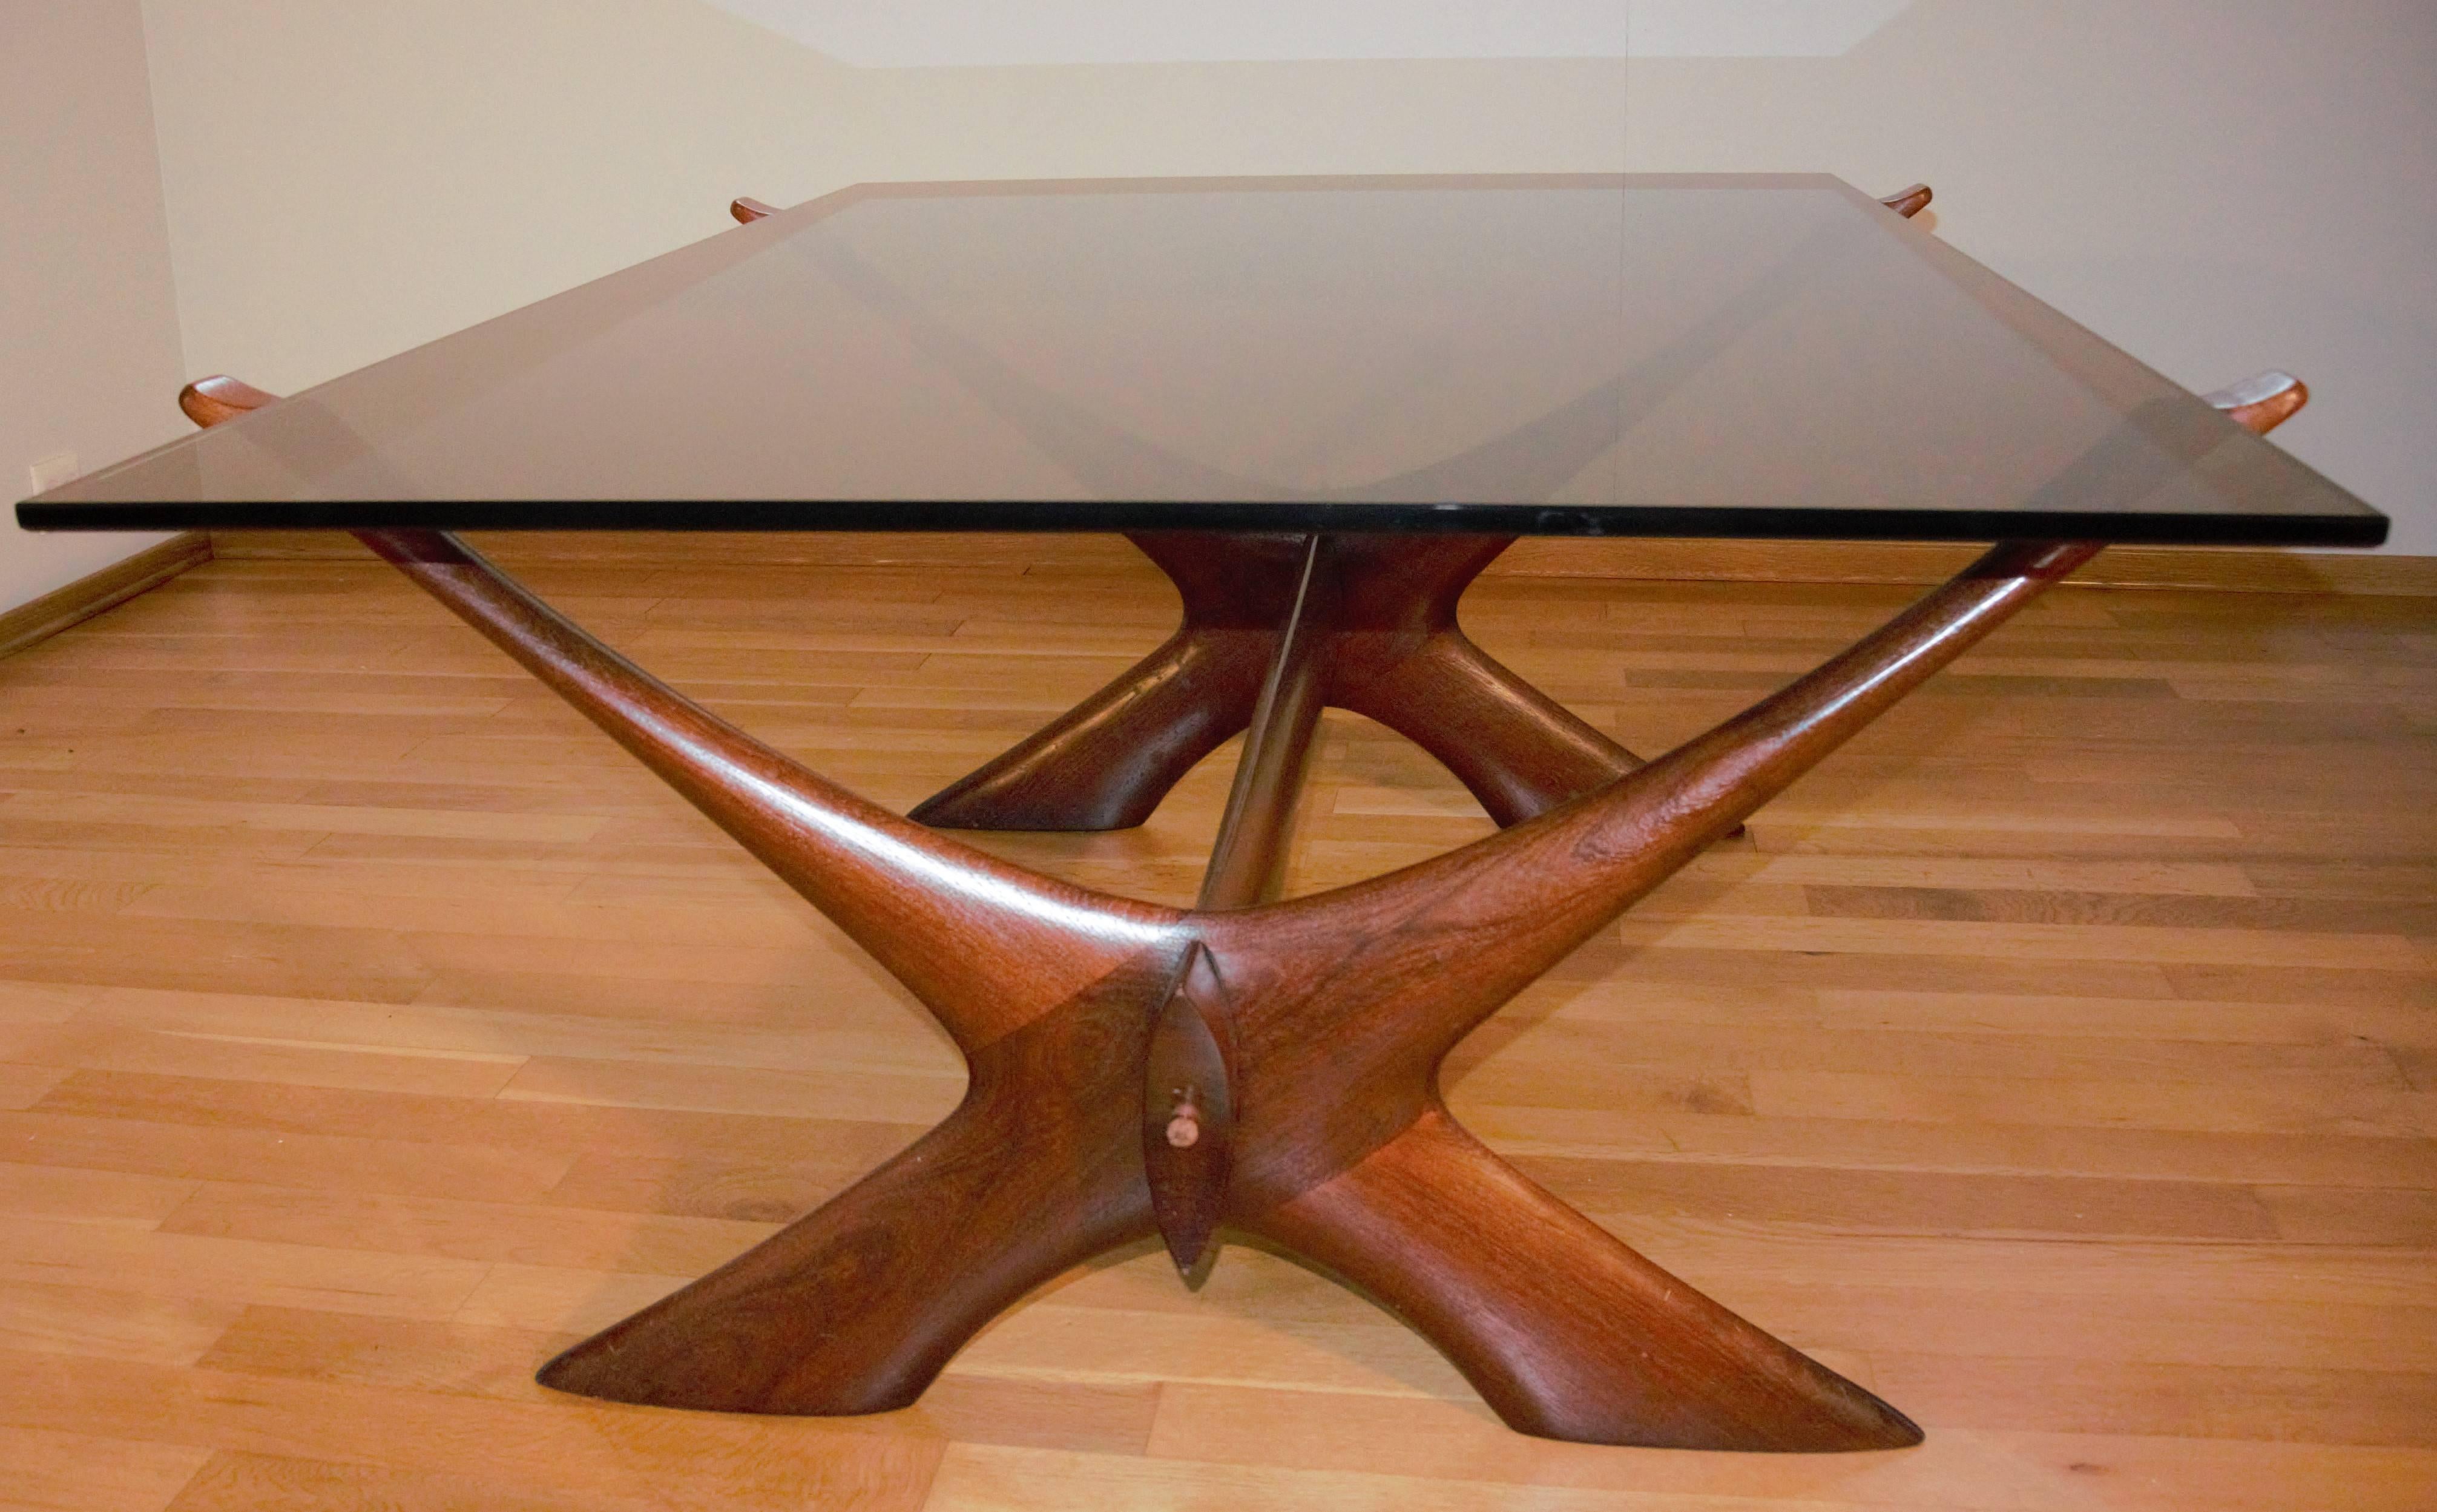 Beautiful and stylish sculptured teak base table will look fabulous in a lounge or office as a coffee table or side table.

Model Nr 9. 
Designed by Fredrik Schriever and called The Abeln, produced by Orebro, Sweden. Glasbord nr 9 ca 1967, Bangkok